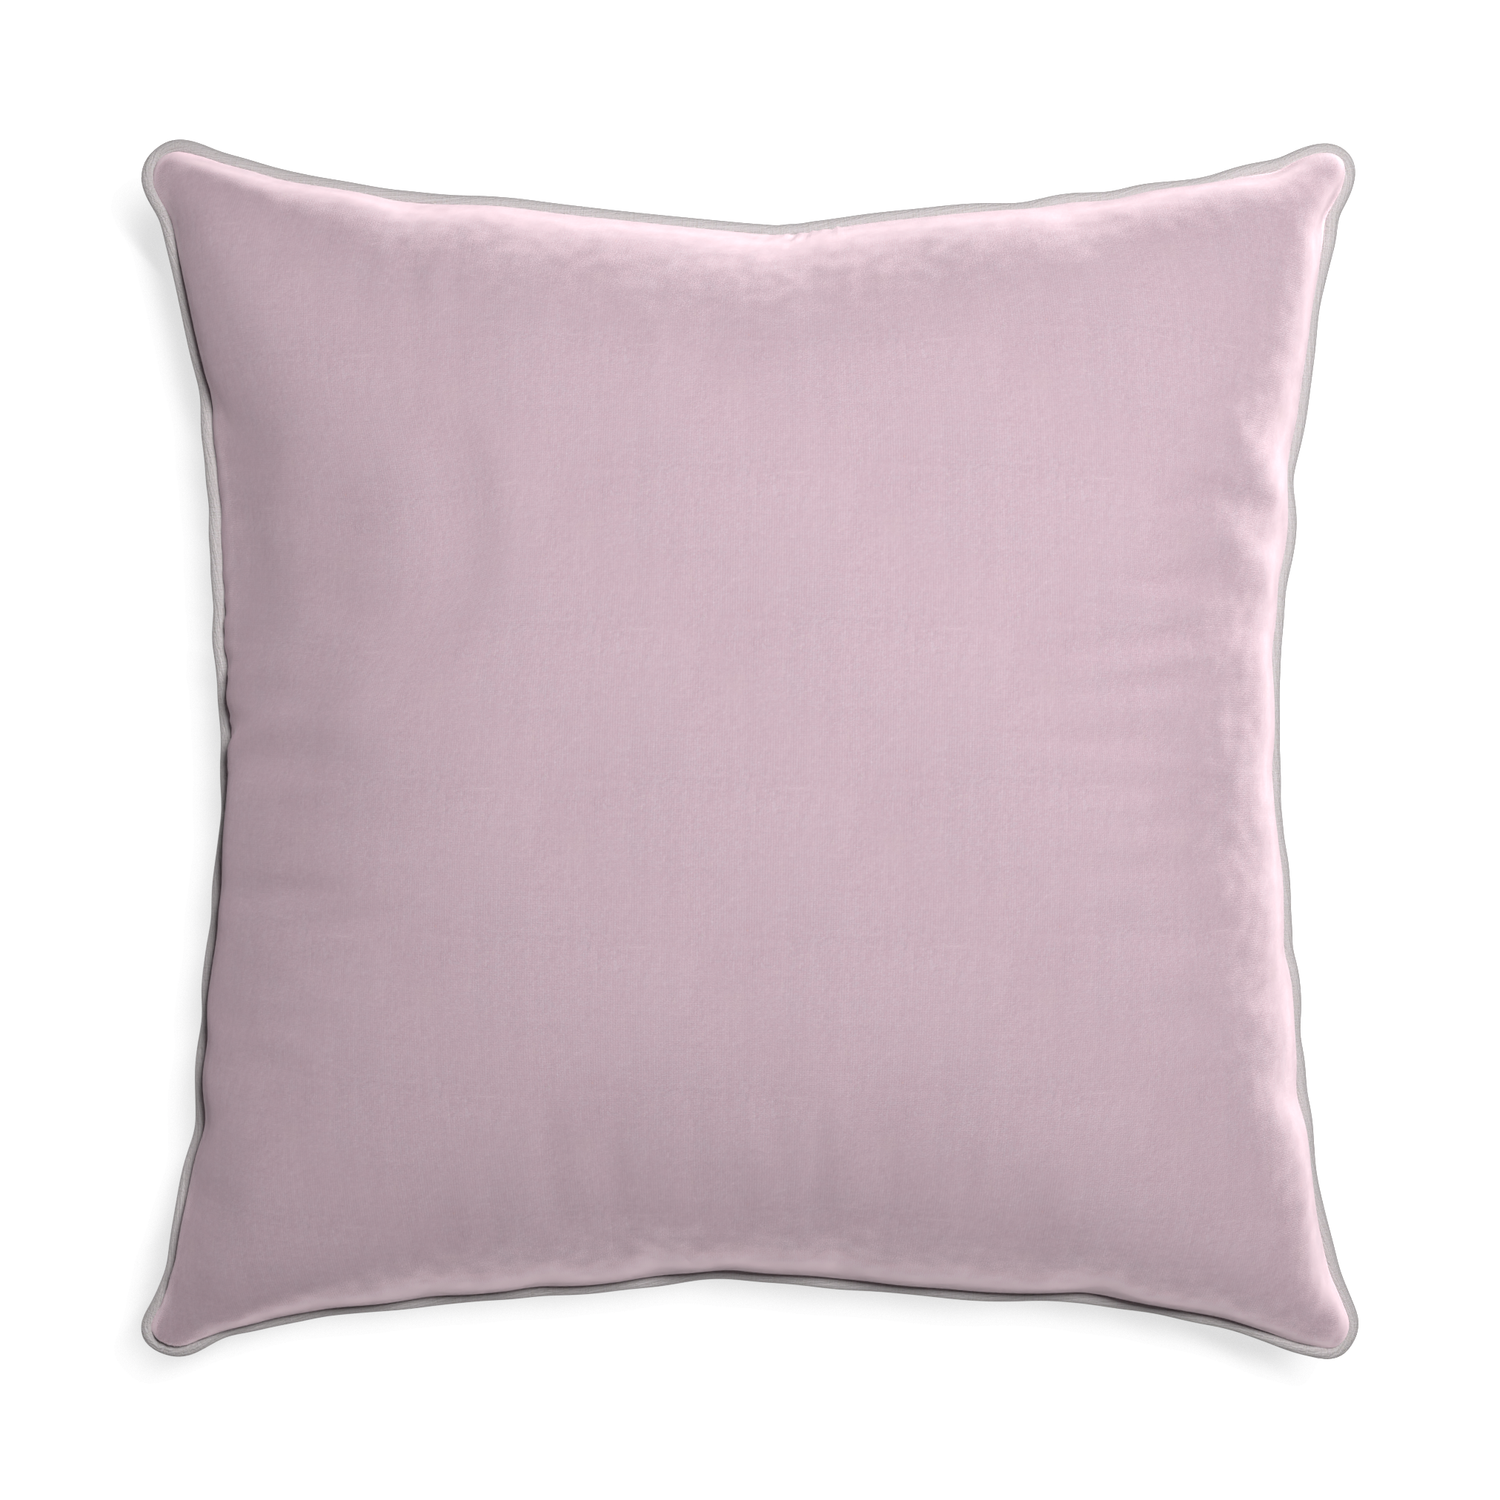 Euro-sham lilac velvet custom lilacpillow with pebble piping on white background